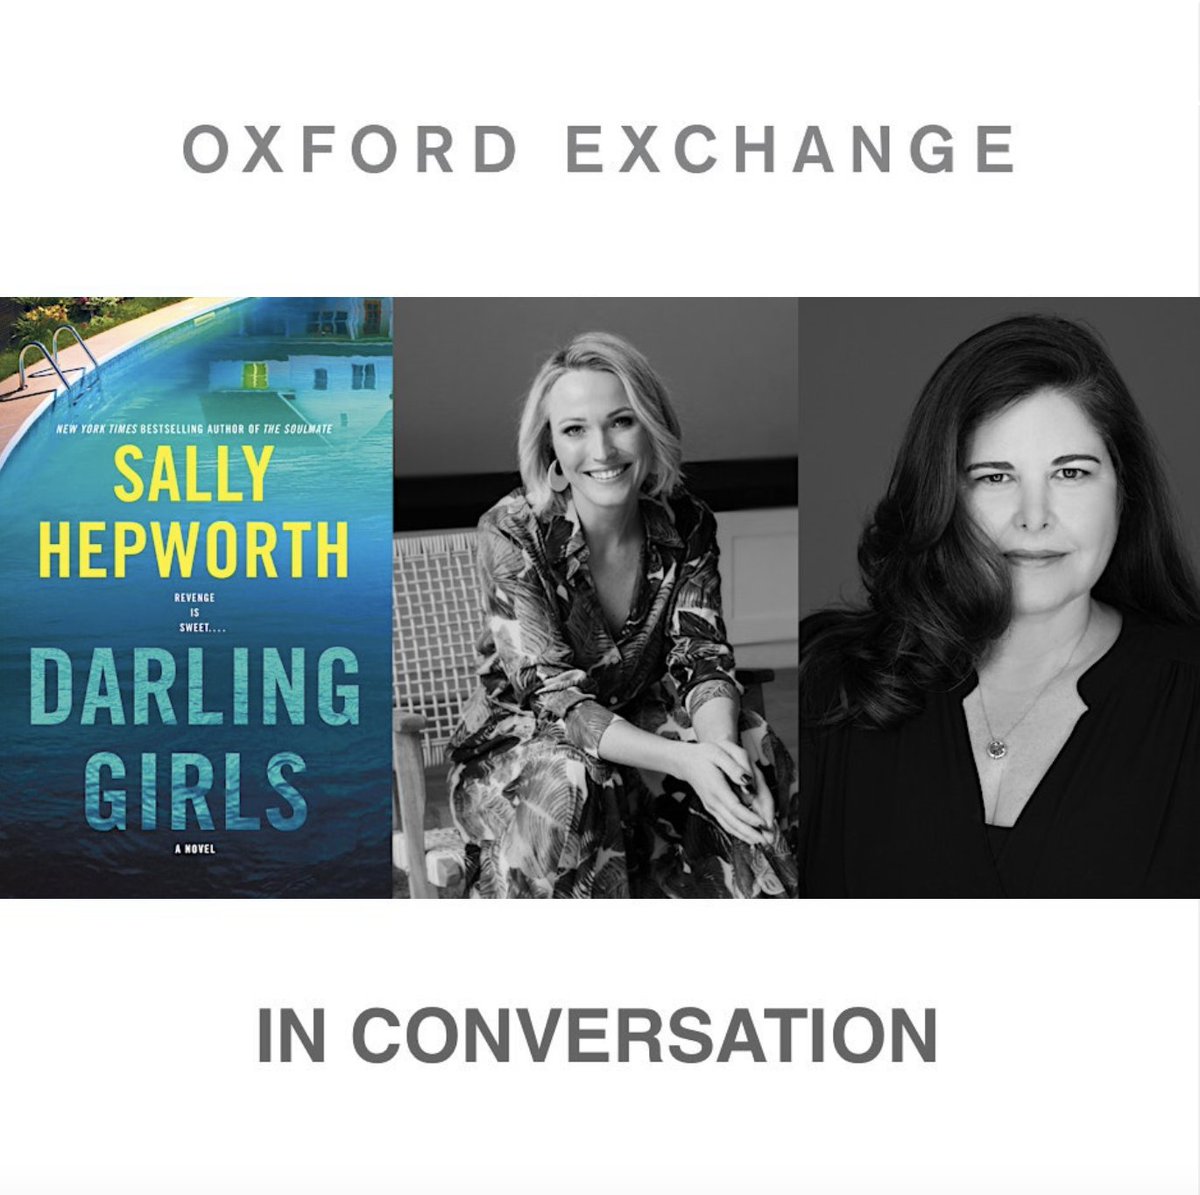 Wishing @sallyhepworth the happiest of pub days for DARLING GIRLS!! We'll be in conversation at @oxfordexchange on May 2nd at 6:30pm. Can’t wait to see her and chat about the new book (and all things bookish.) Hope you'll join us for a fun evening! Tix: tinyurl.com/5n7j26zz